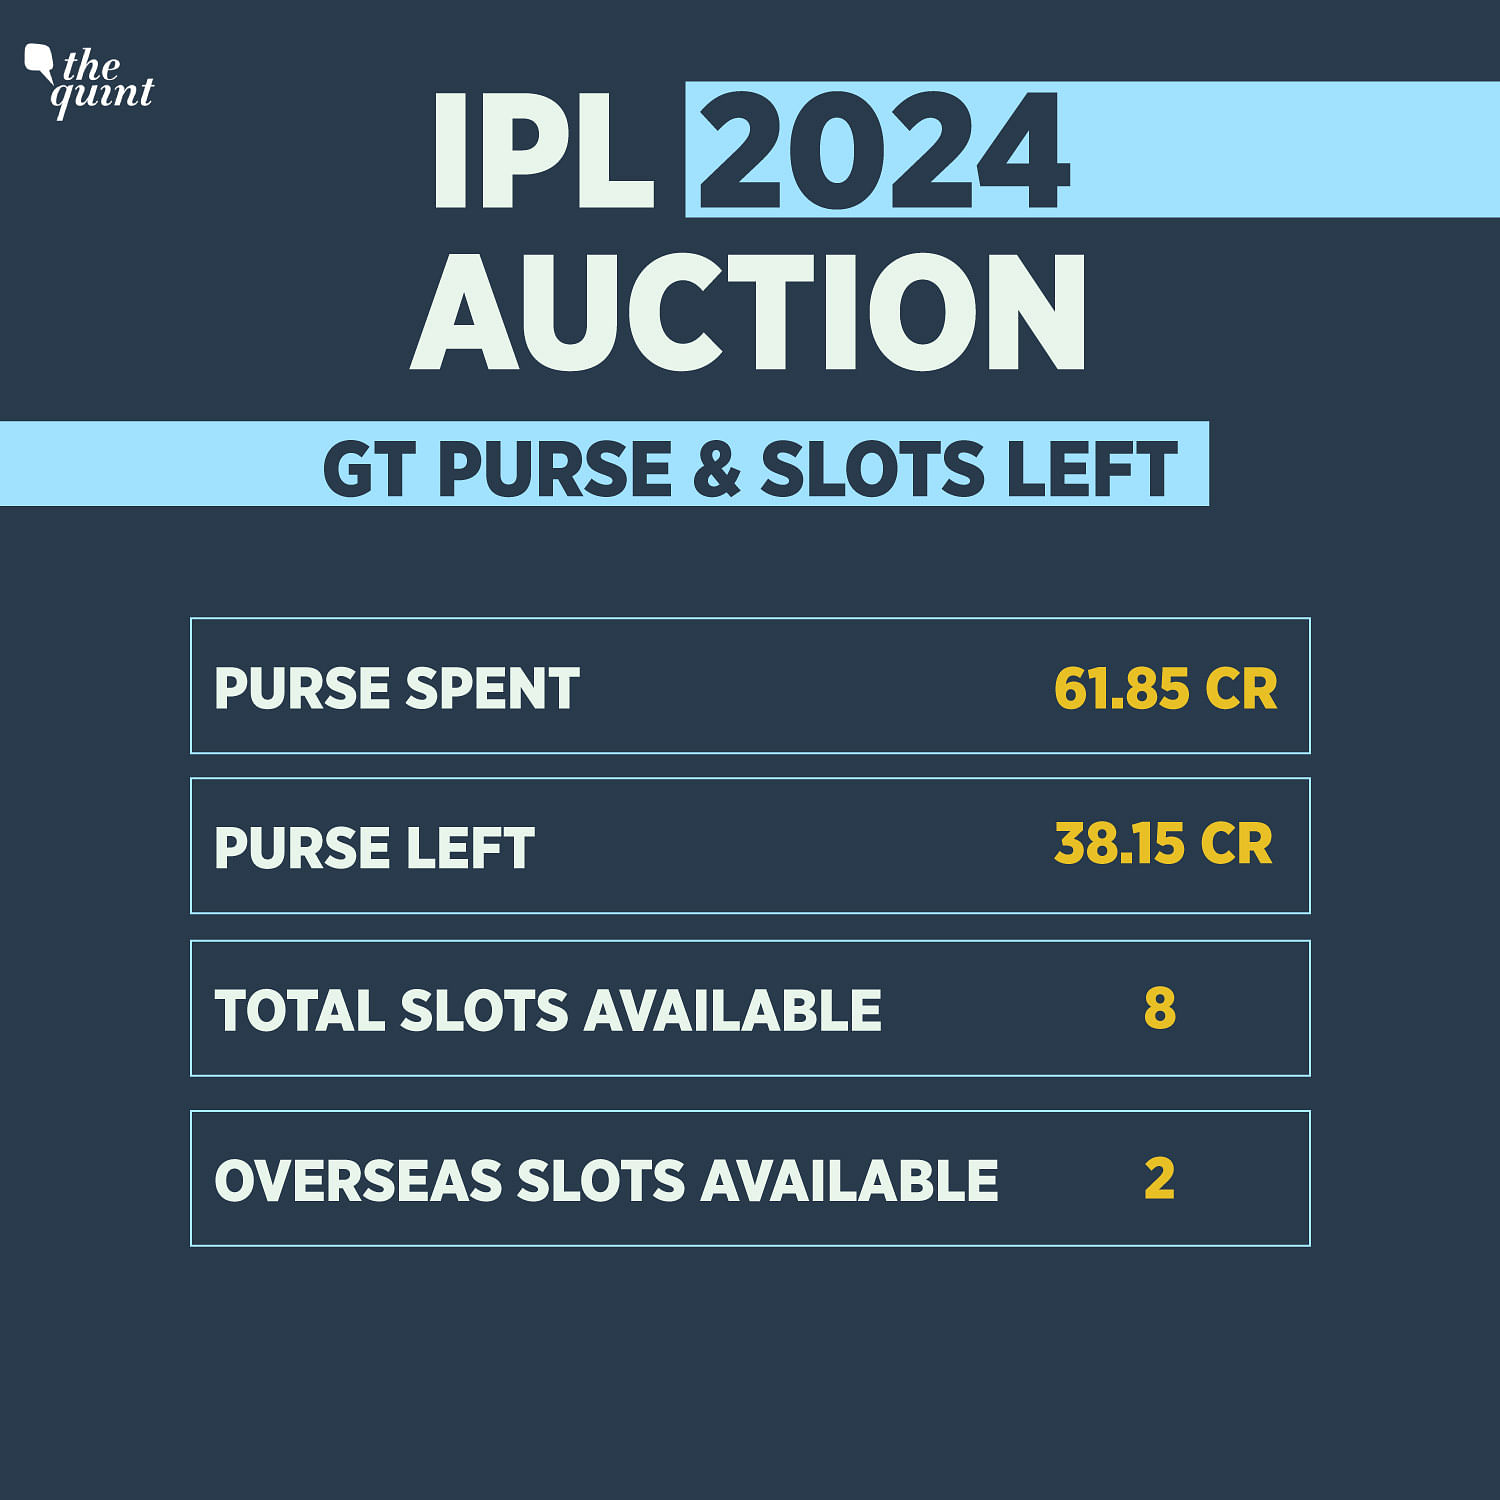 IPL AUCTION STRATEGY: What kind of players will teams bid for and why